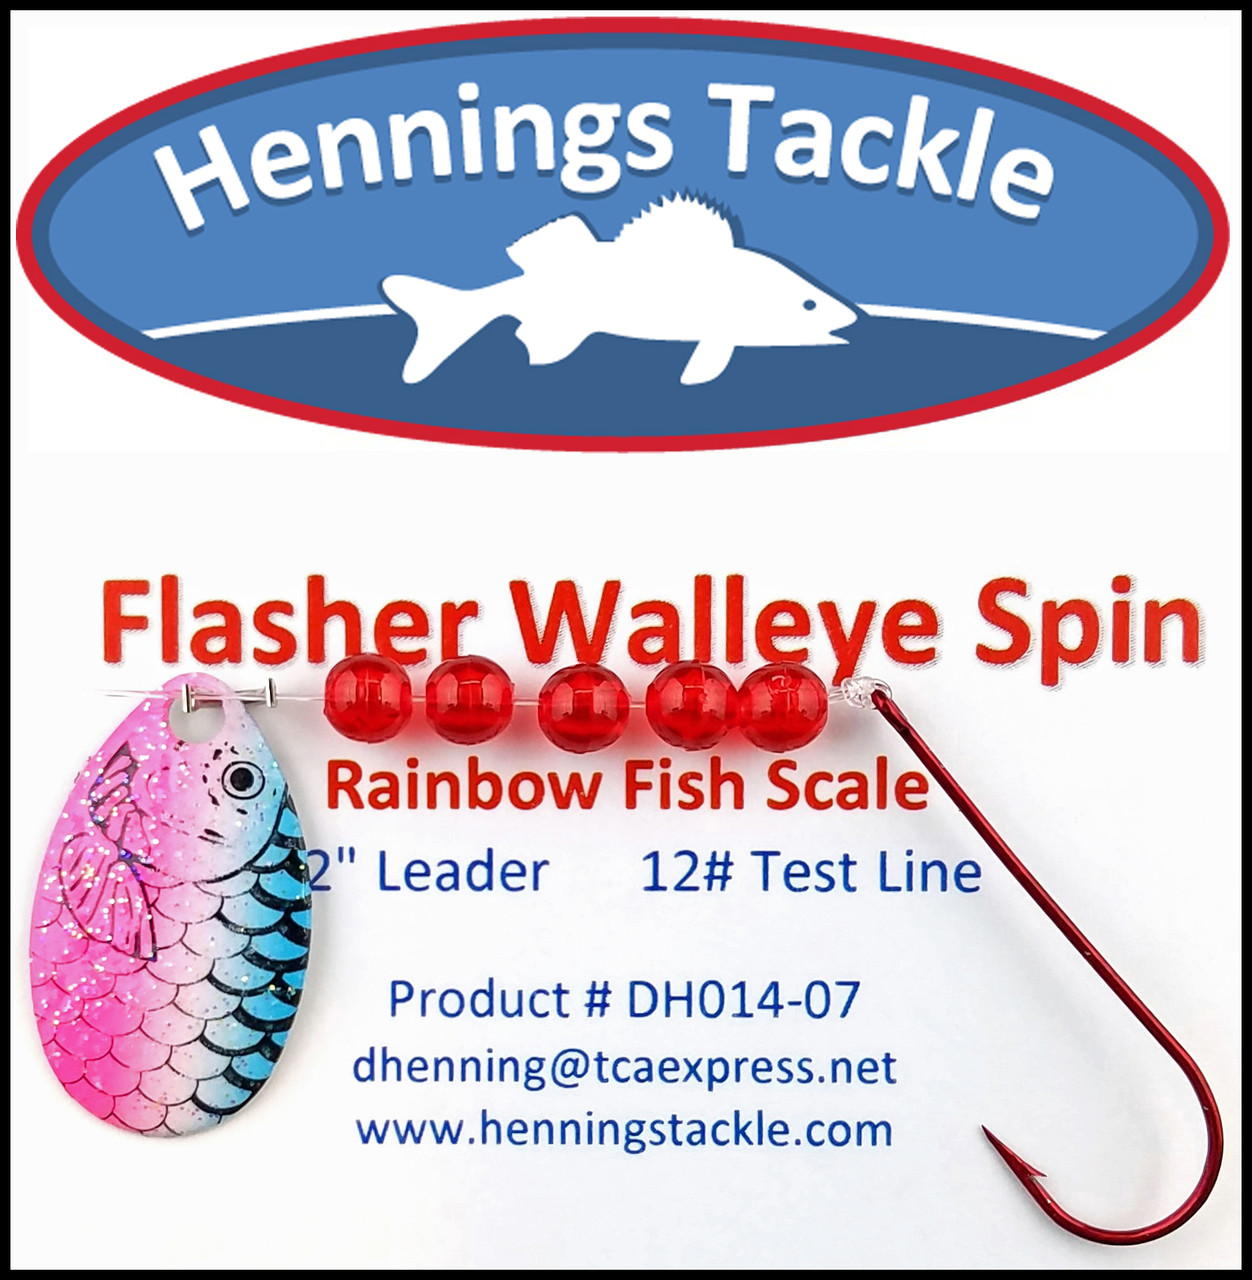 Flasher Walleye Spins - Rainbow Fish Scale - Henning's Tackle